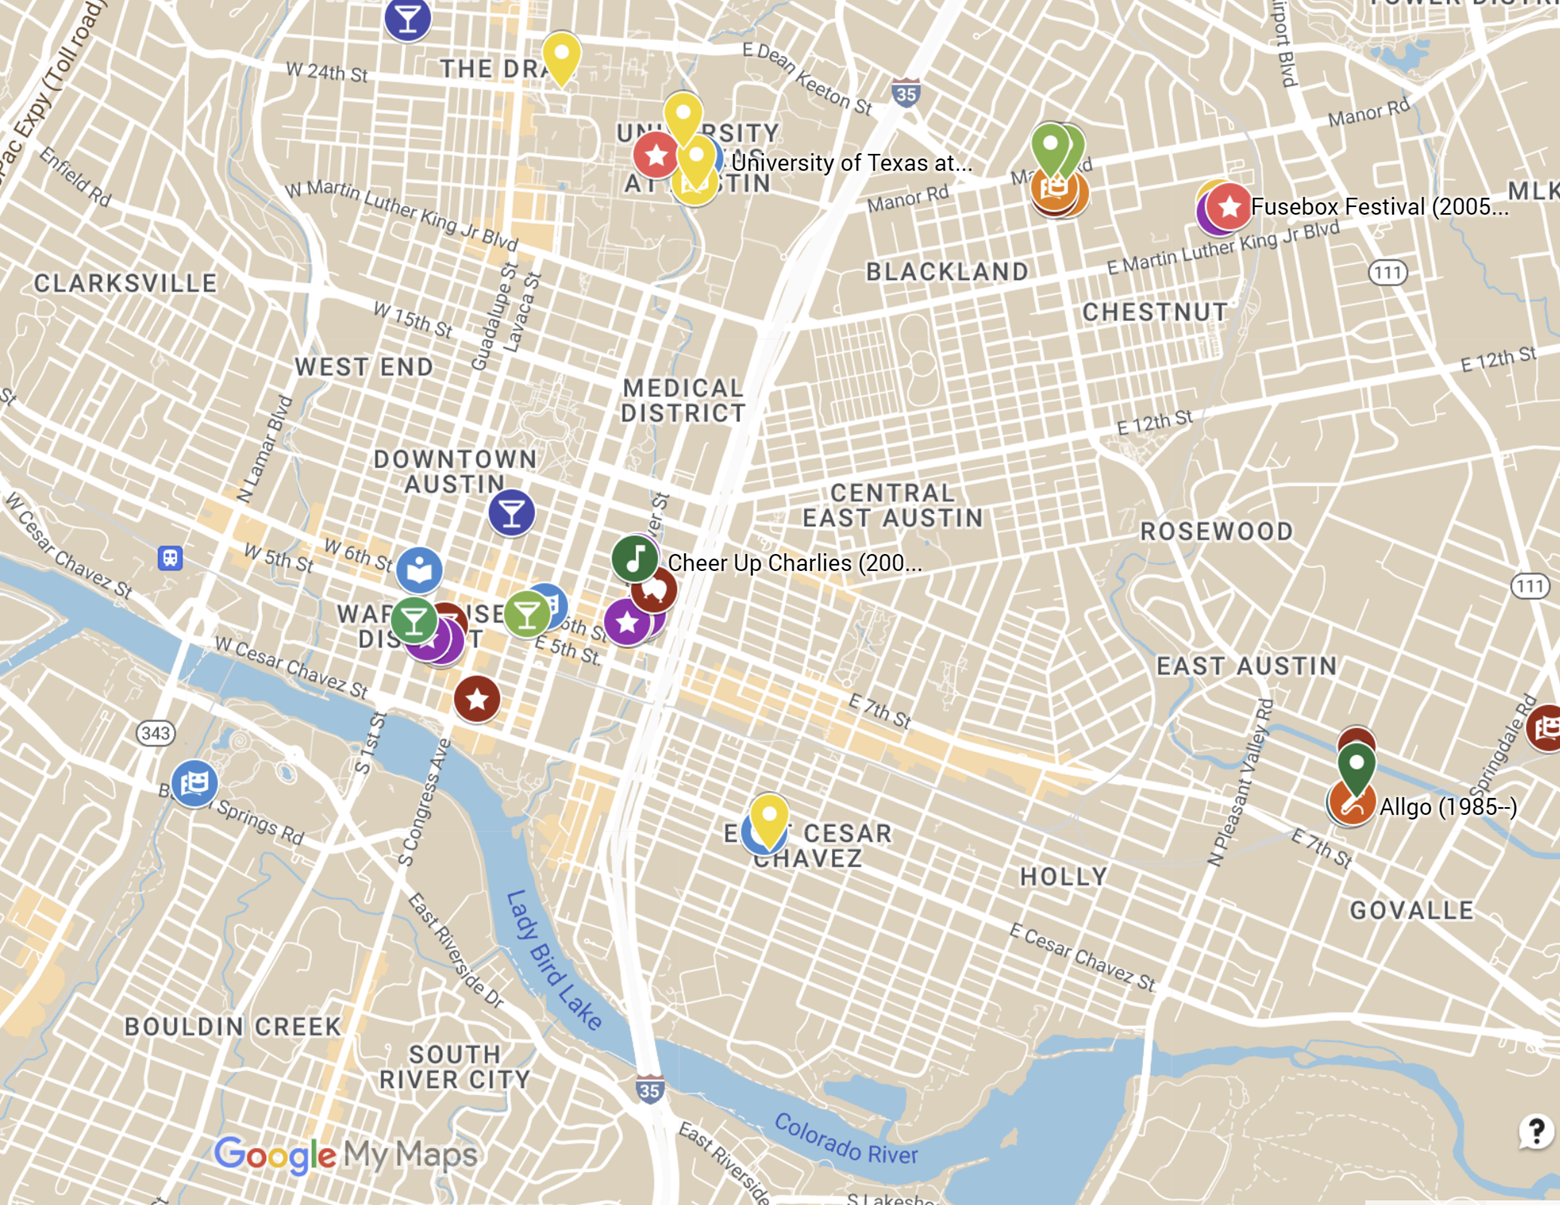 google map of Austin, Texas with queer performance and community sites